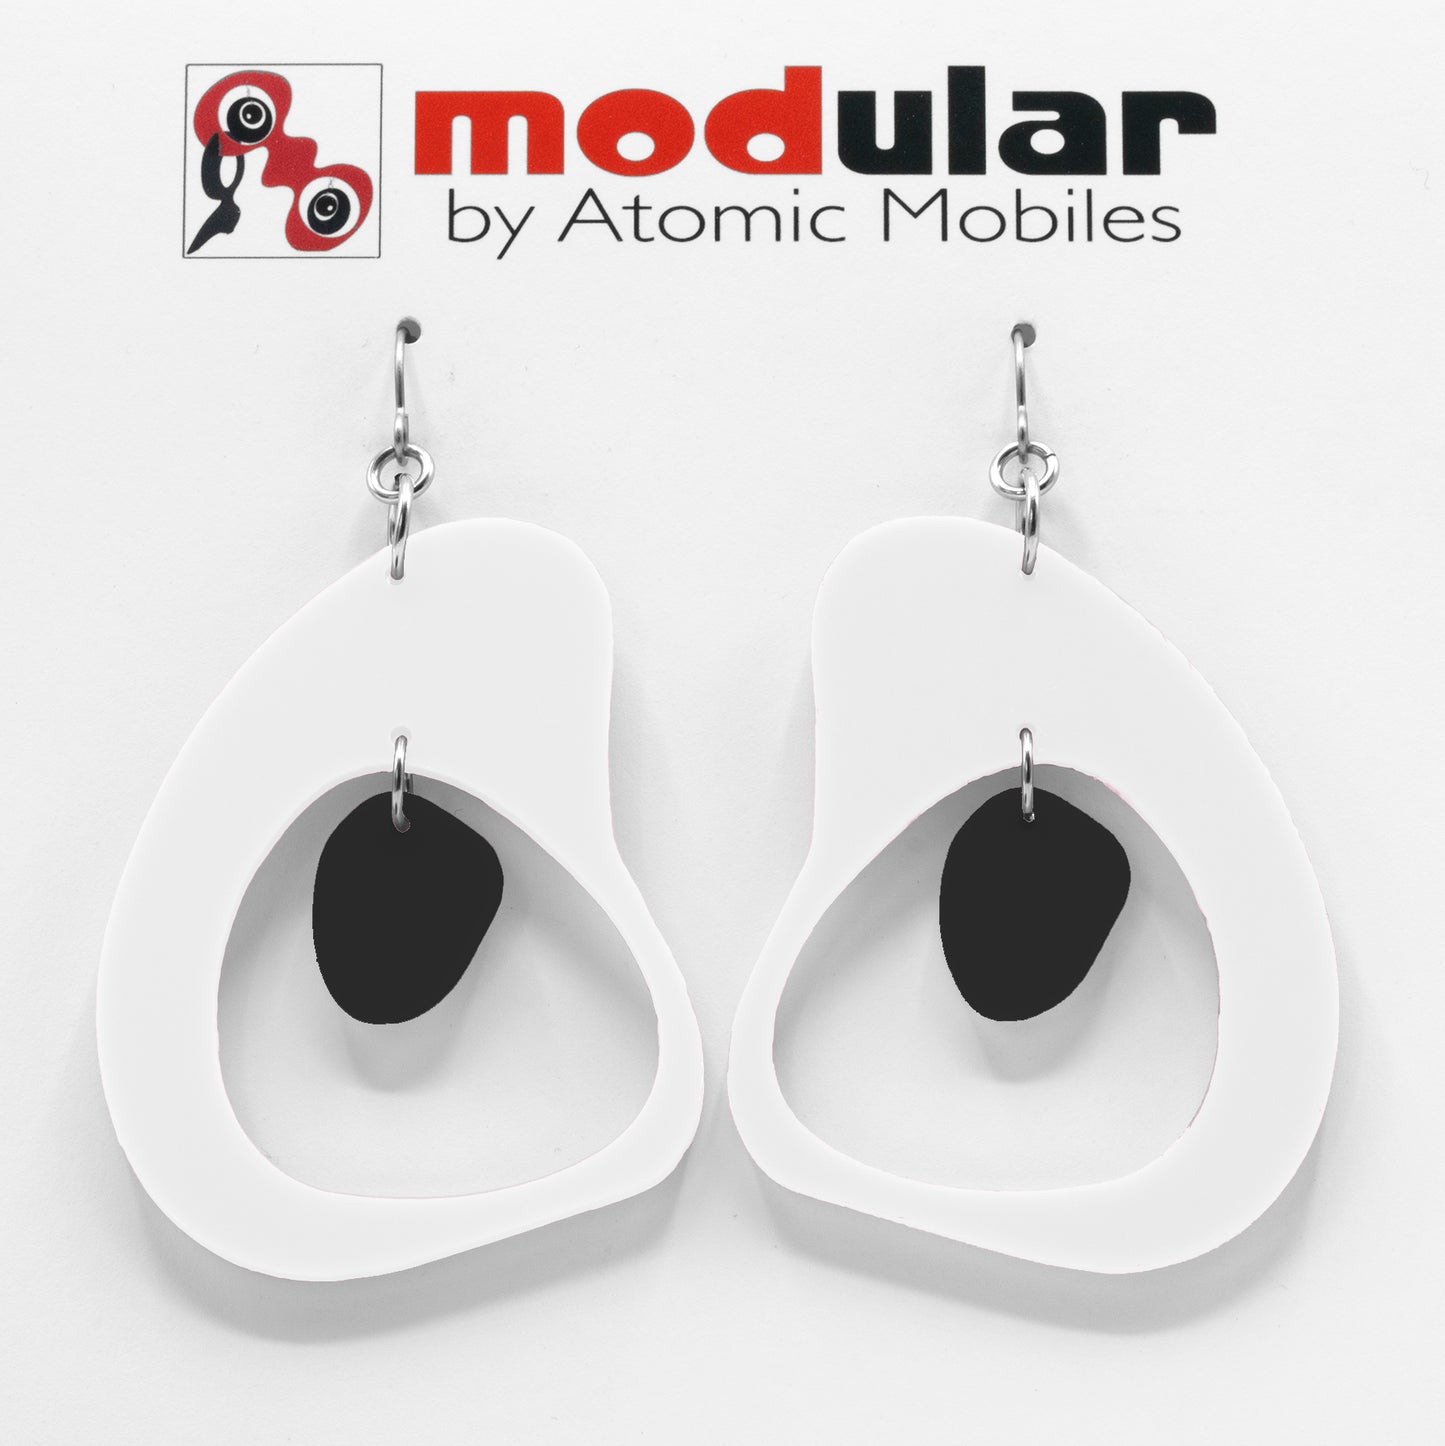 MODular Earrings - Boomerang Statement Earrings in White and Black by AtomicMobiles.com - retro era inspired mod handmade jewelry